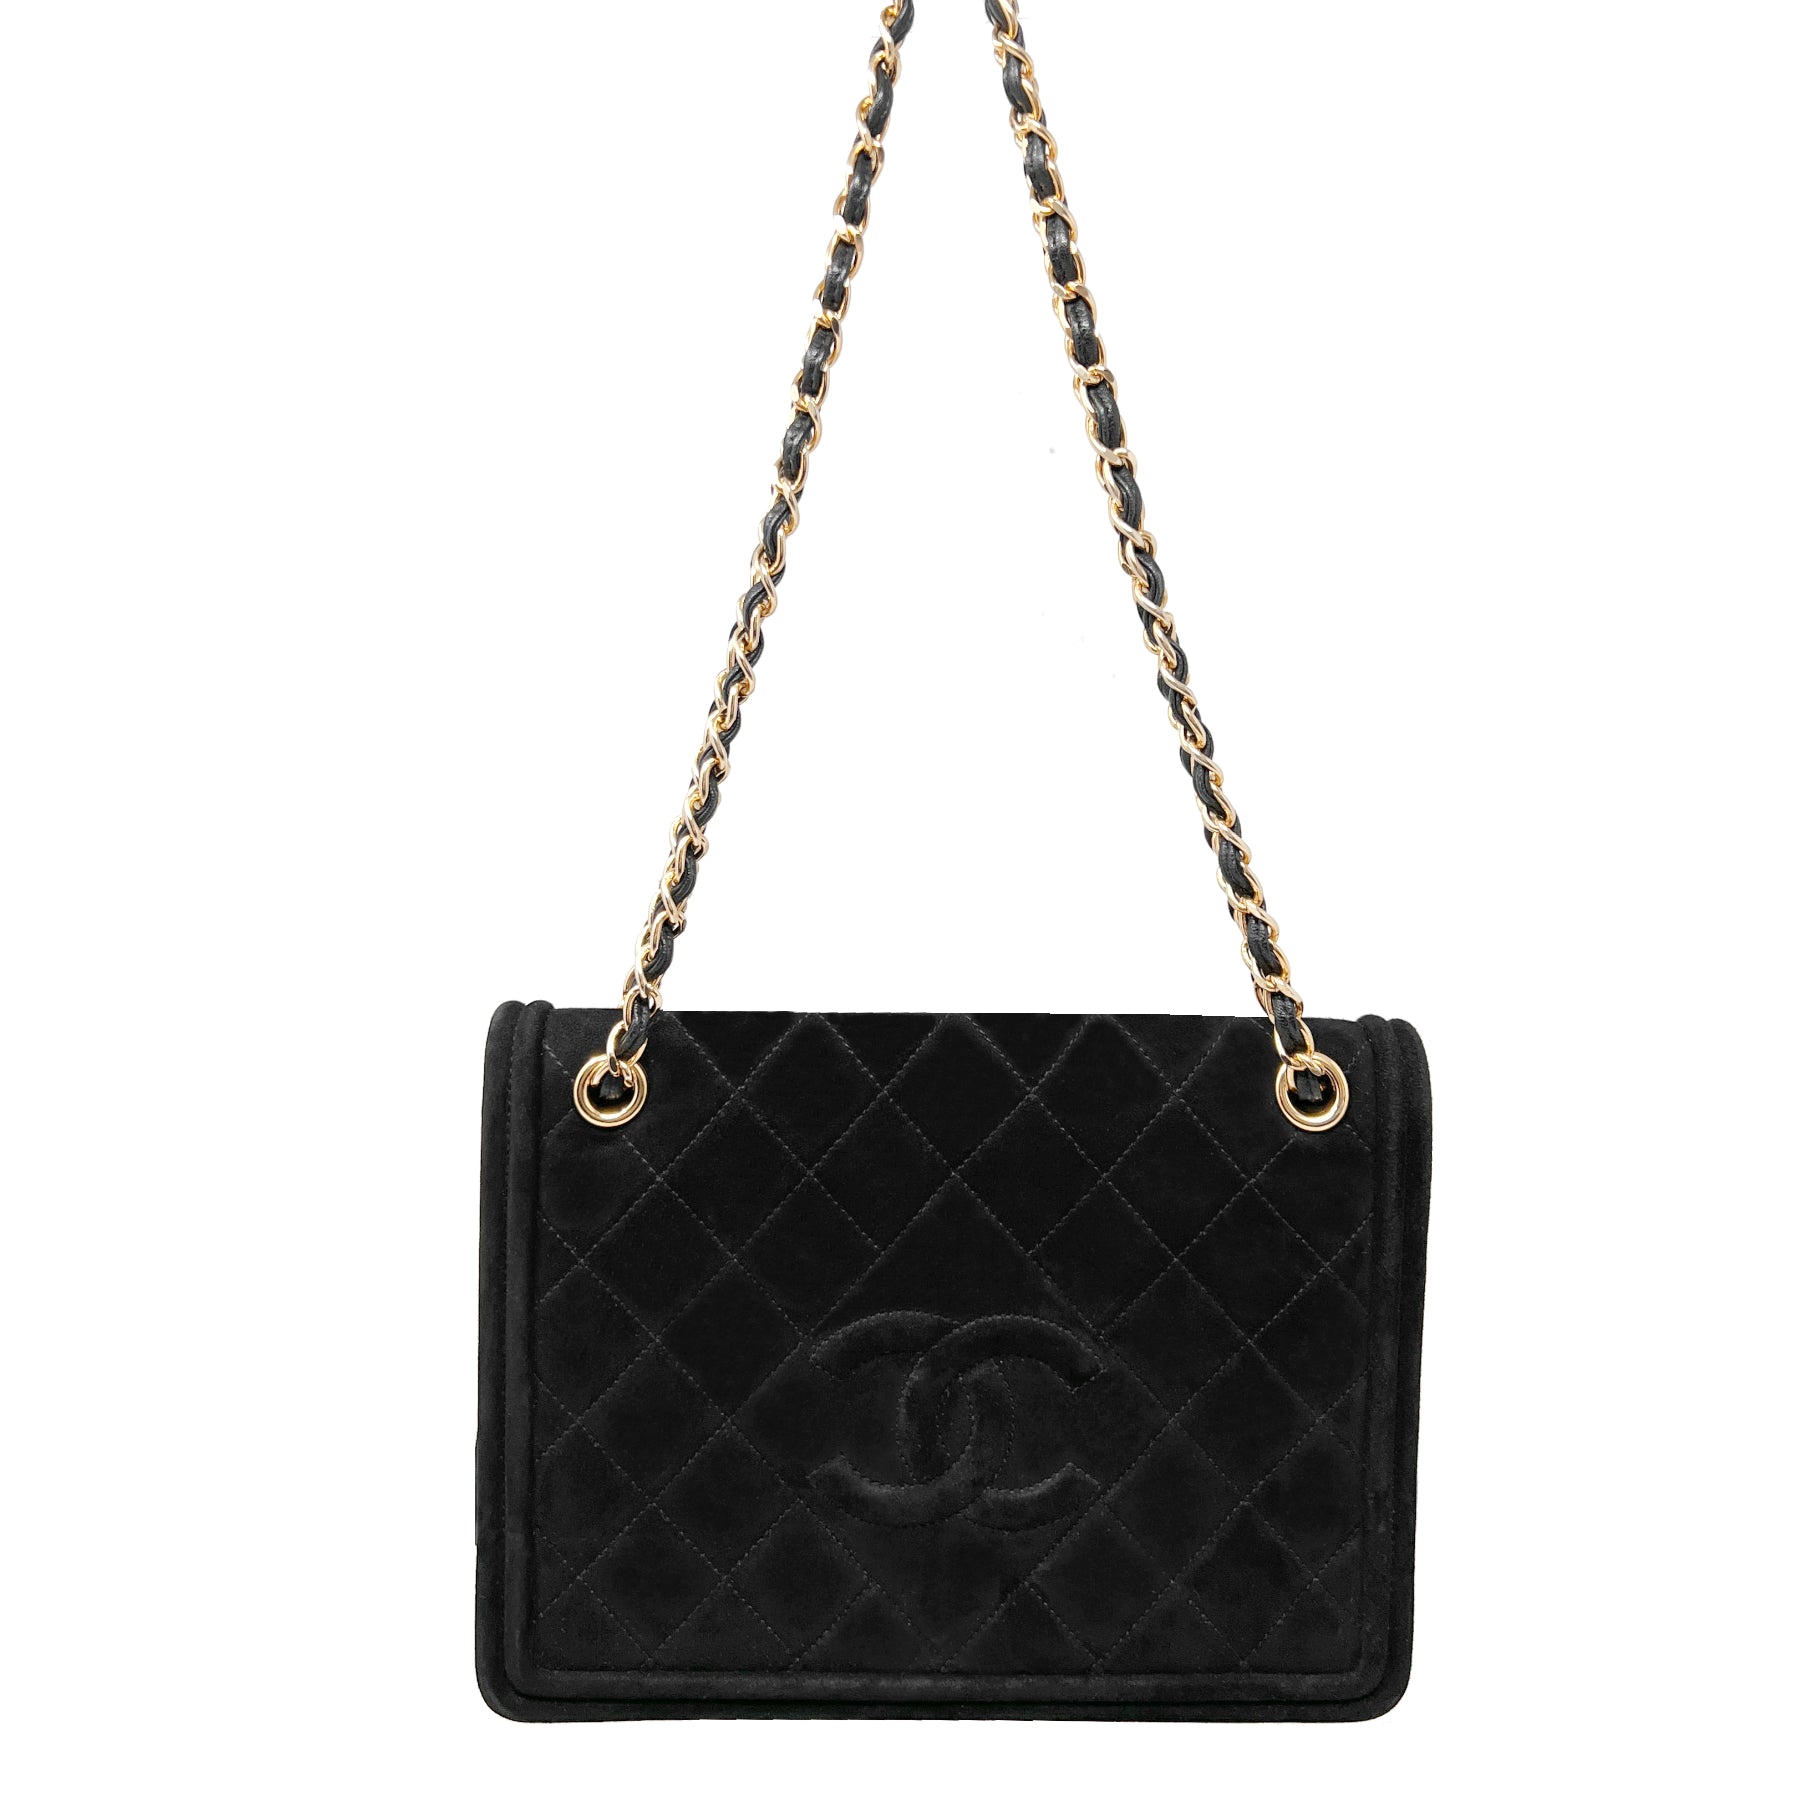 Chanel 1991 Vintage Suede Quilted Flap Bag